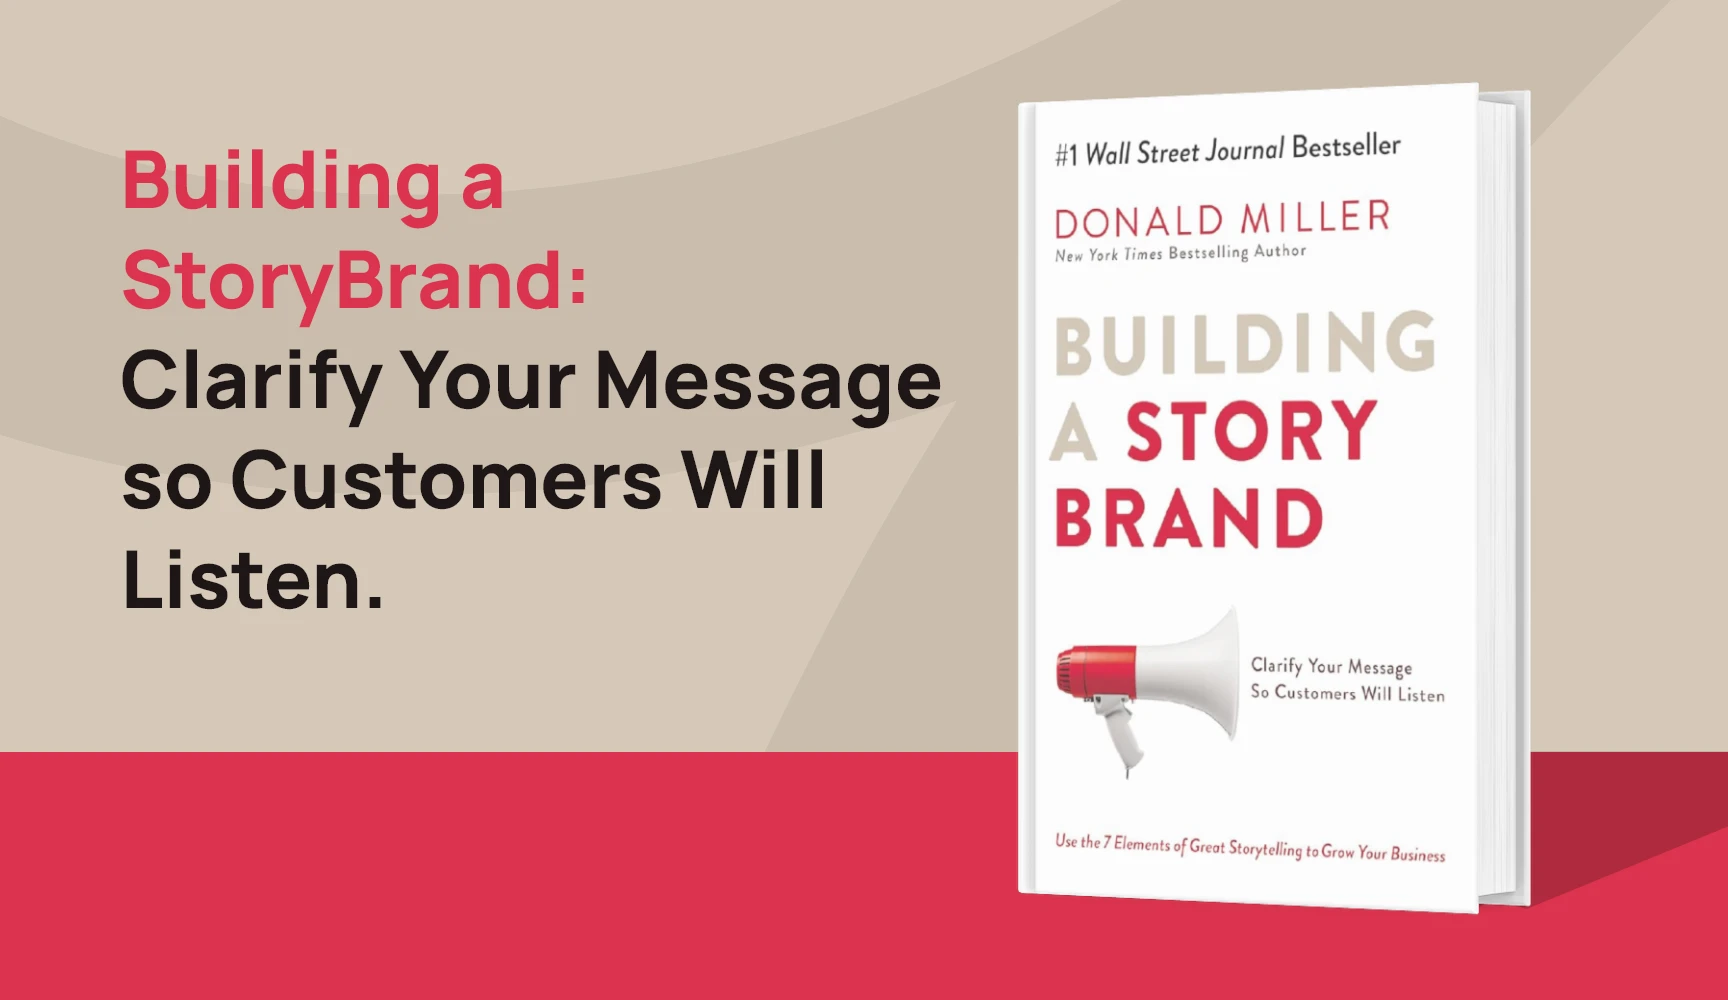 Building a storybrand is one of the best Ecommerce books that will help you clarify your message for customers to brand effectively.